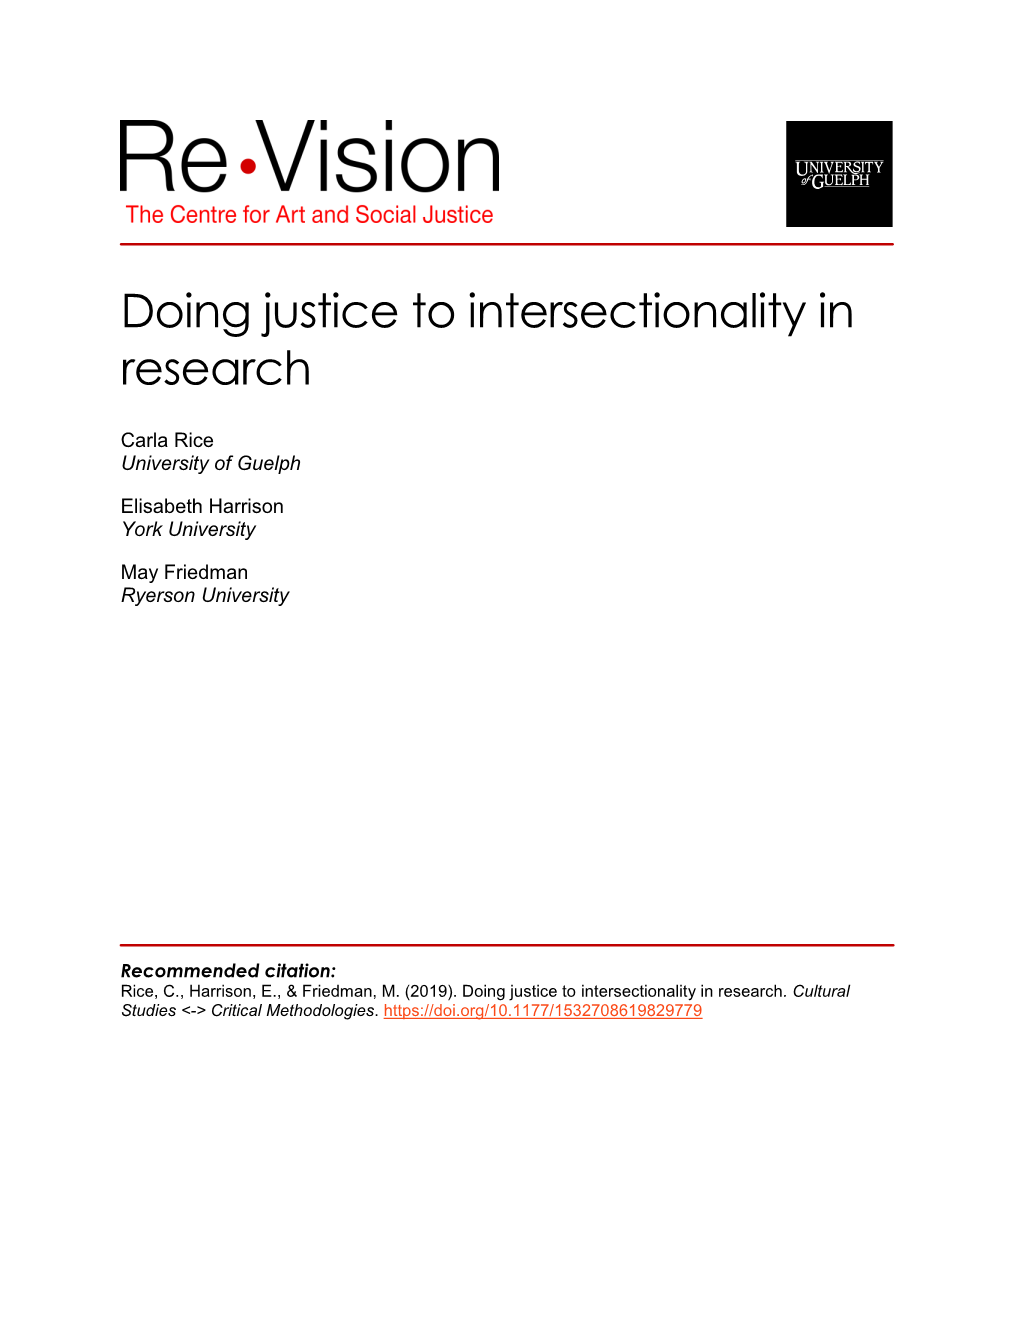 Doing Justice to Intersectionality in Research